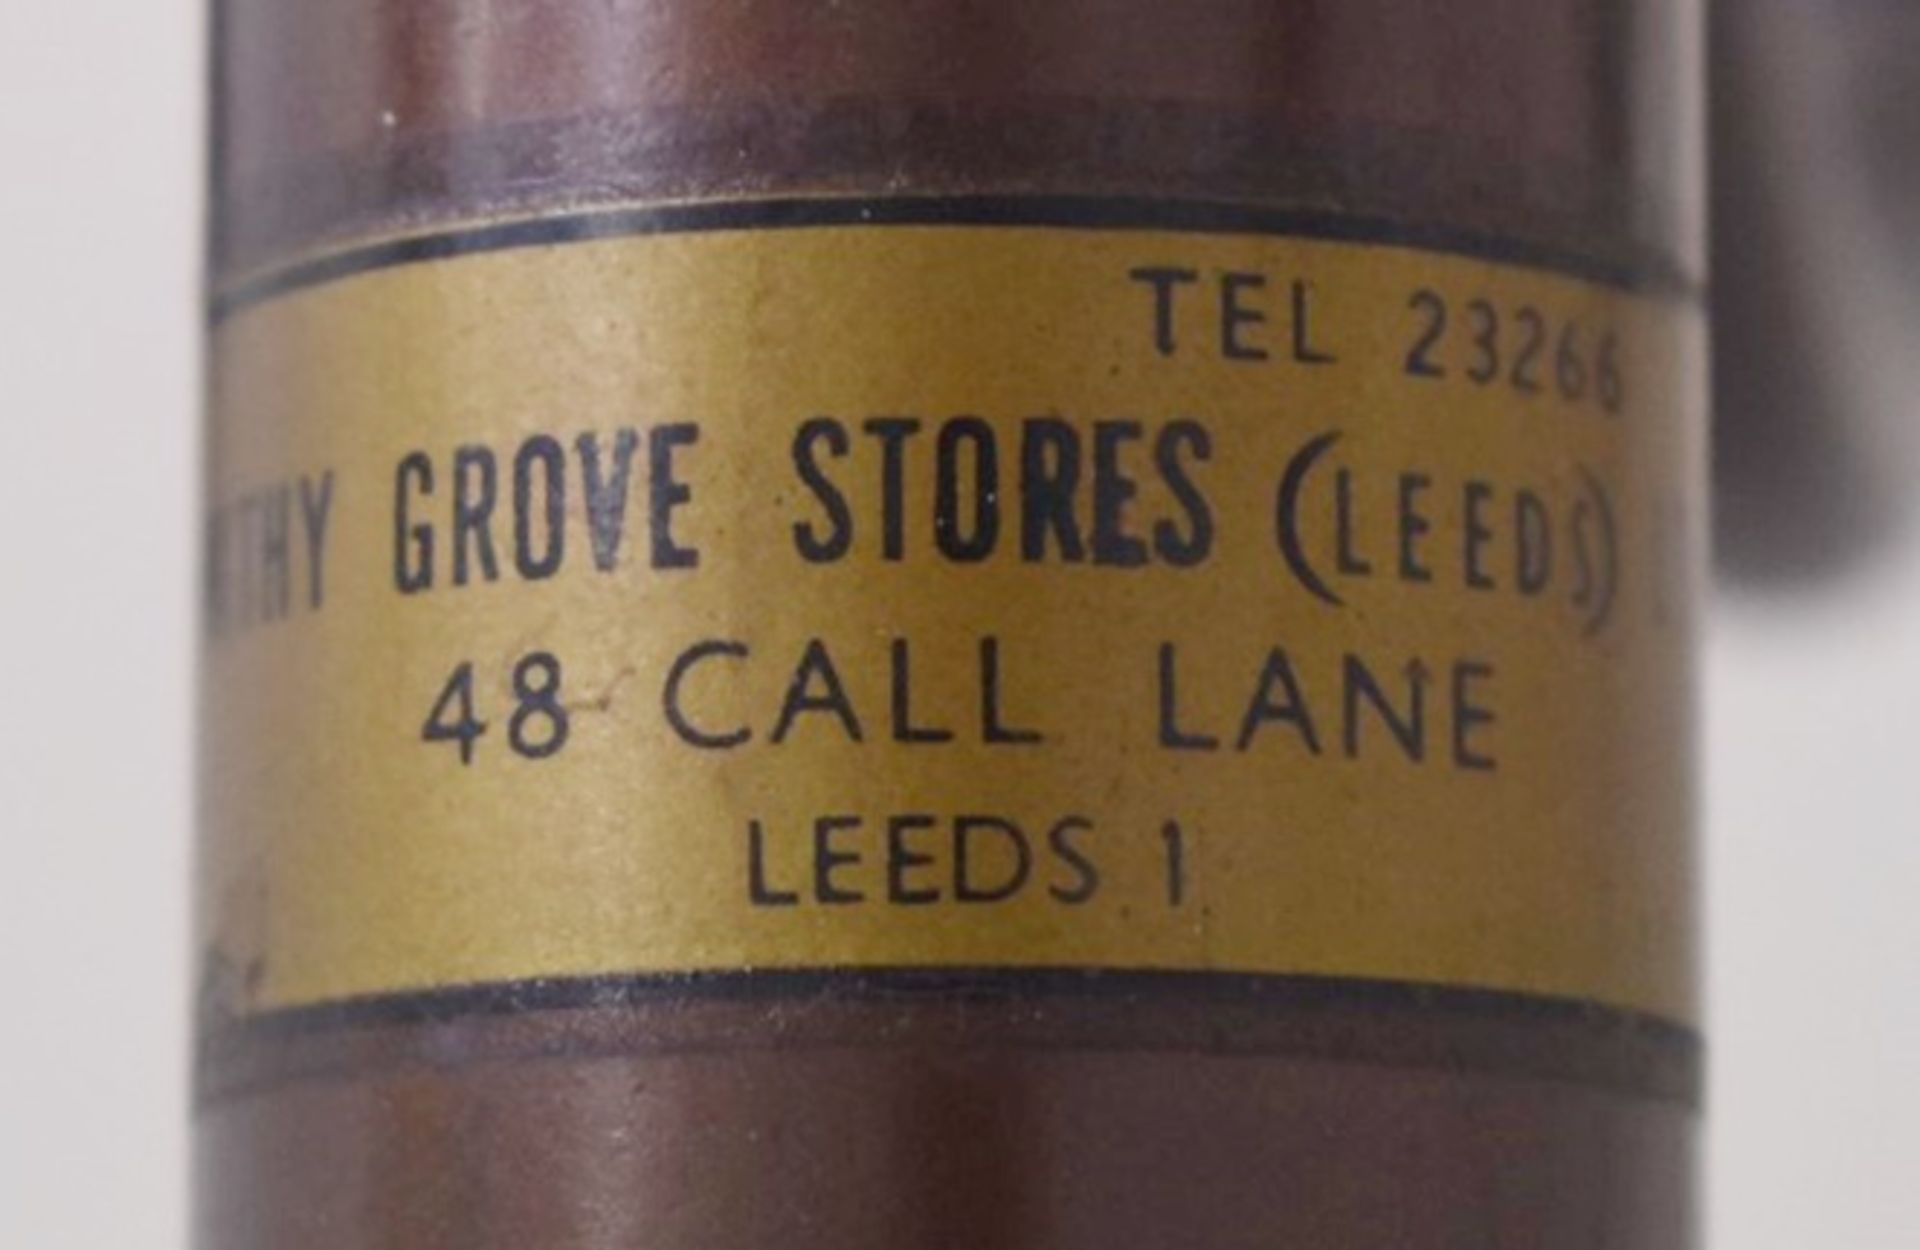 1 x Vintage Coat / Umbrella Stand - Withy Grove Stores Leeds - 48 Call Lane - Ref IT - CL409 - - Image 5 of 6